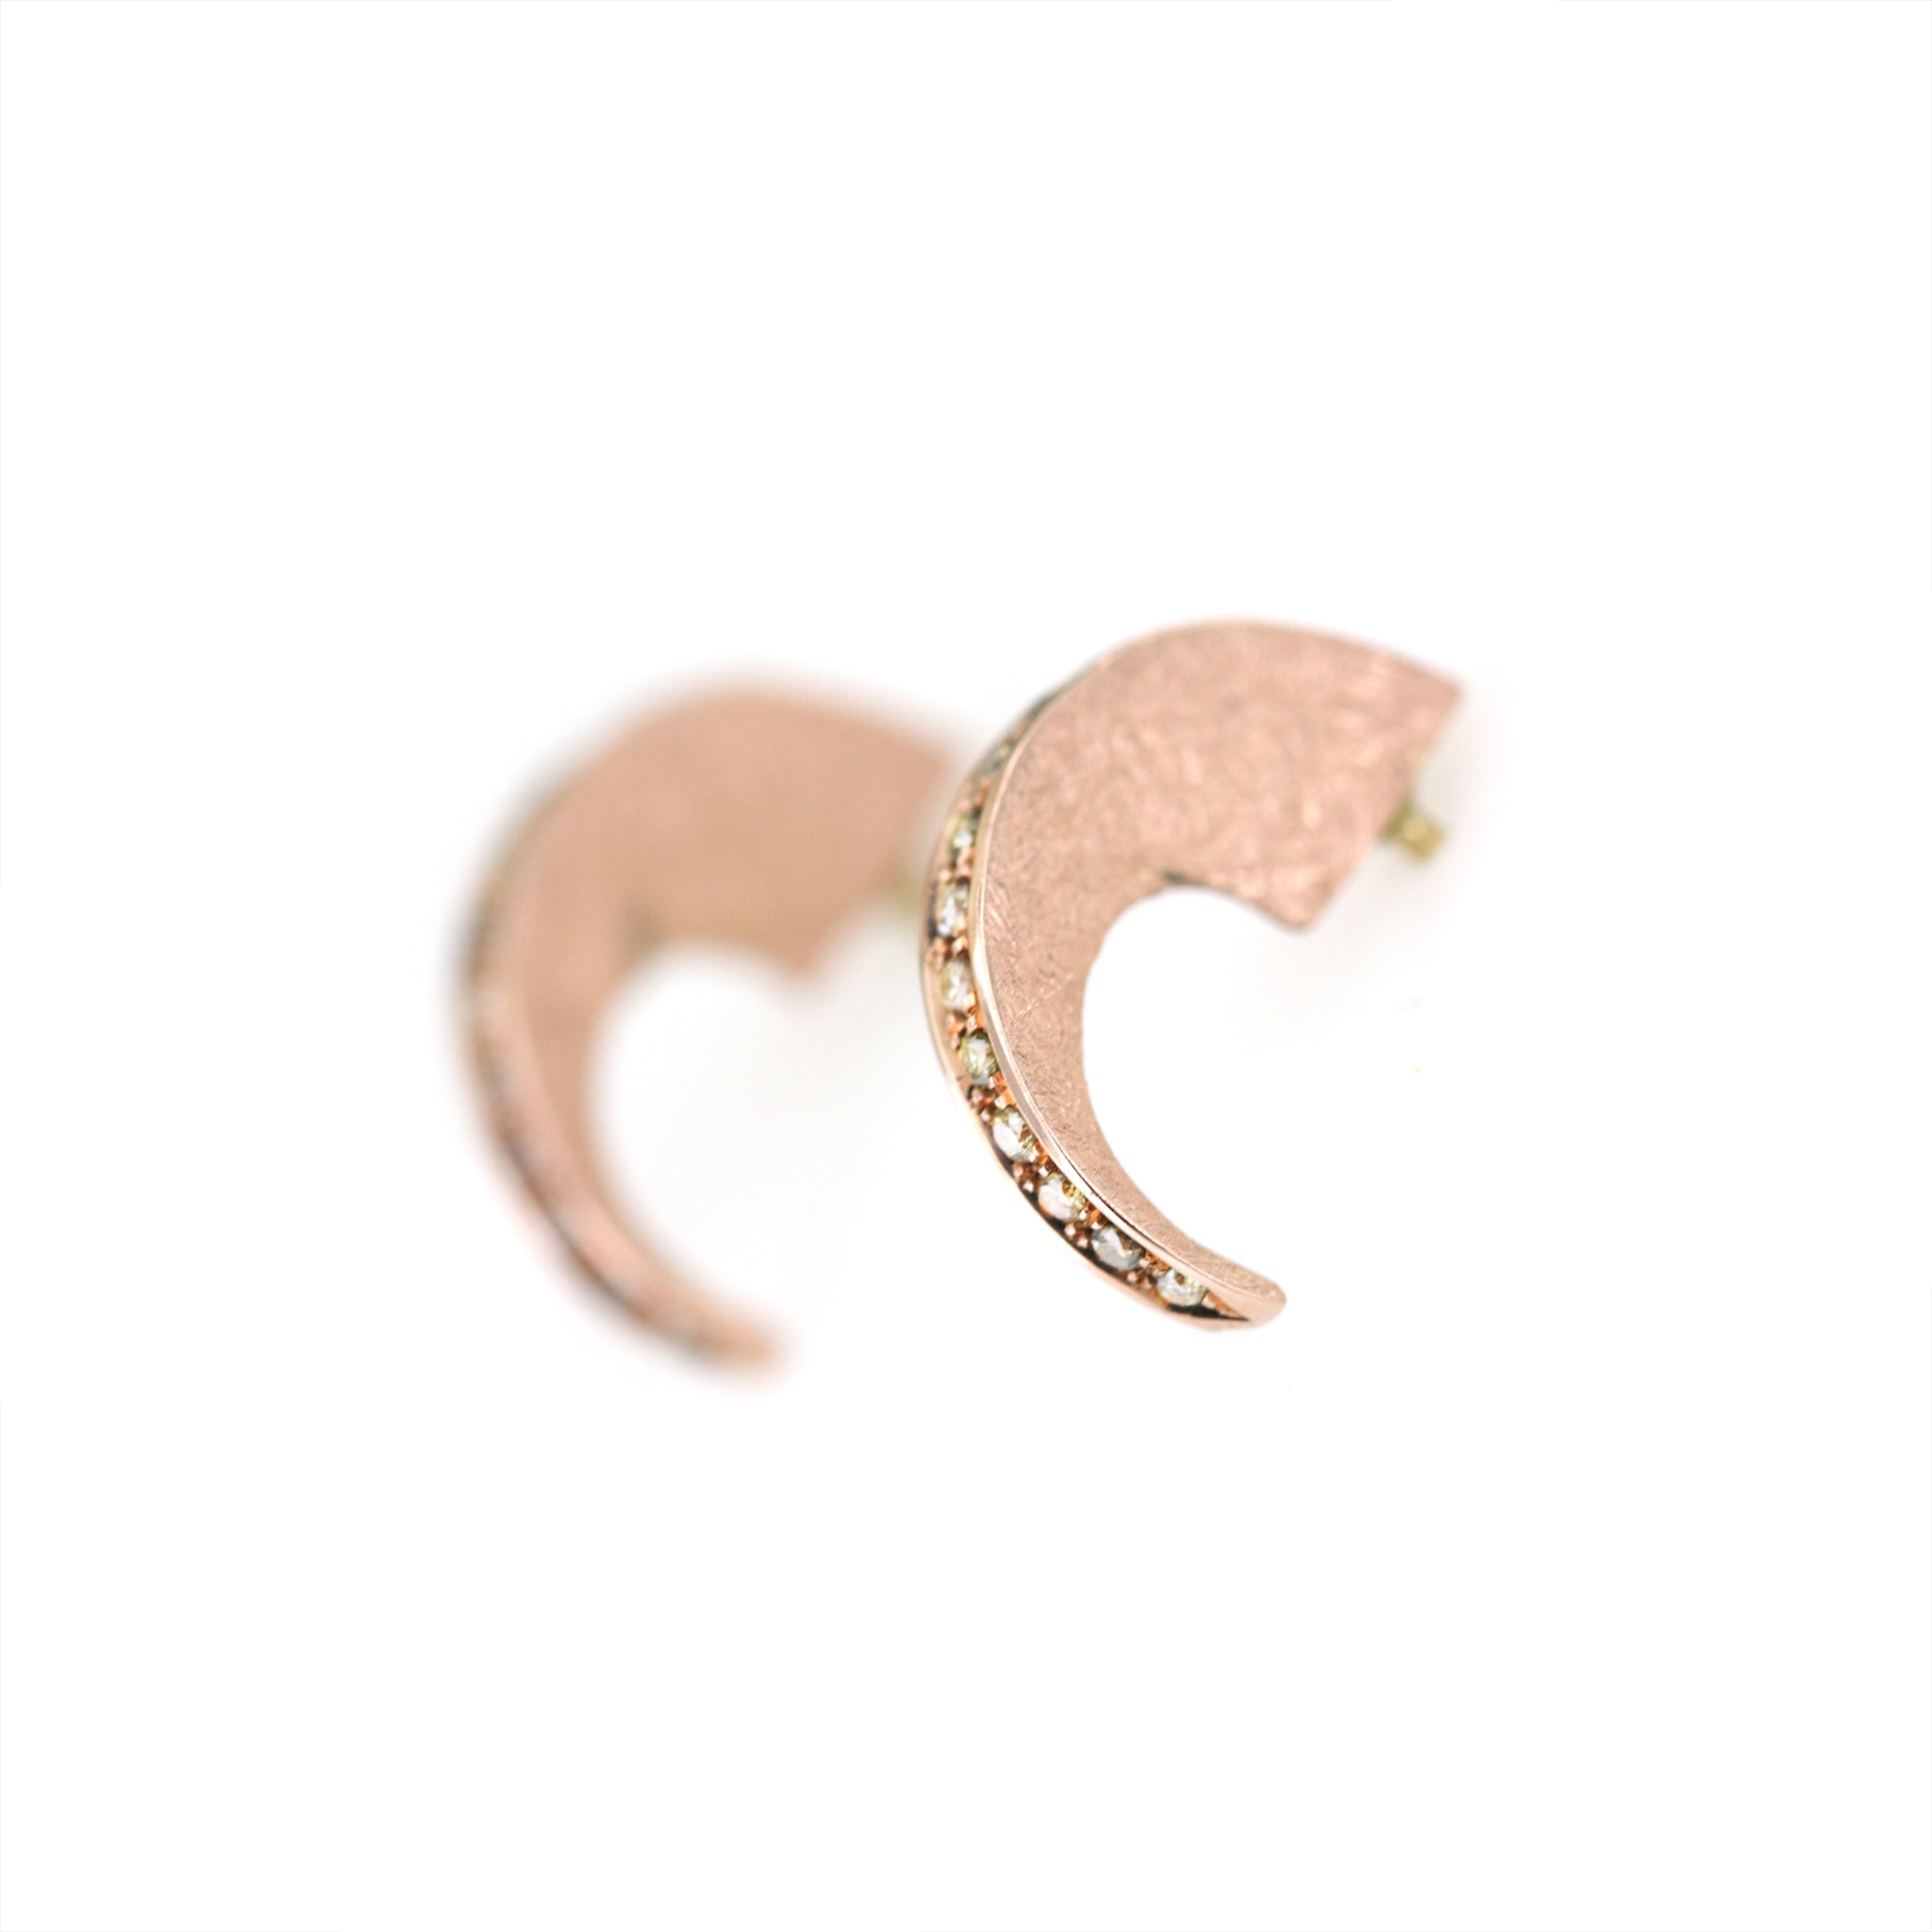 Tiger Claw Studs - champagne diamond pave